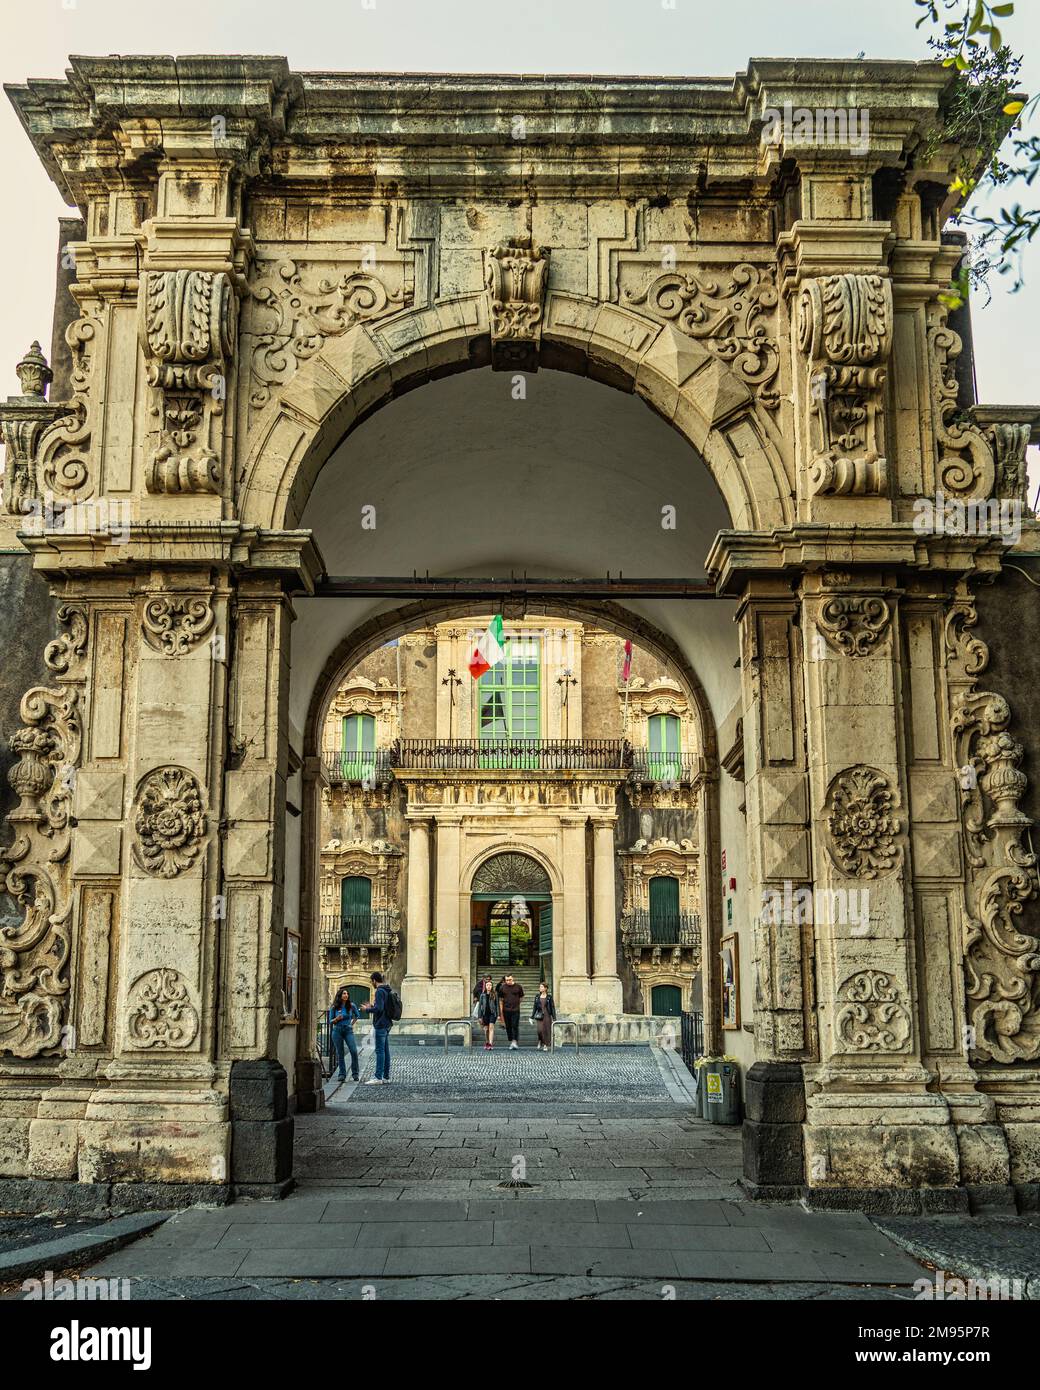 The majestic entrance to the Benedictine Monastery, headquarters of the Cultural Workshops Association. Catania, Sicily, Italy, Europe Stock Photo